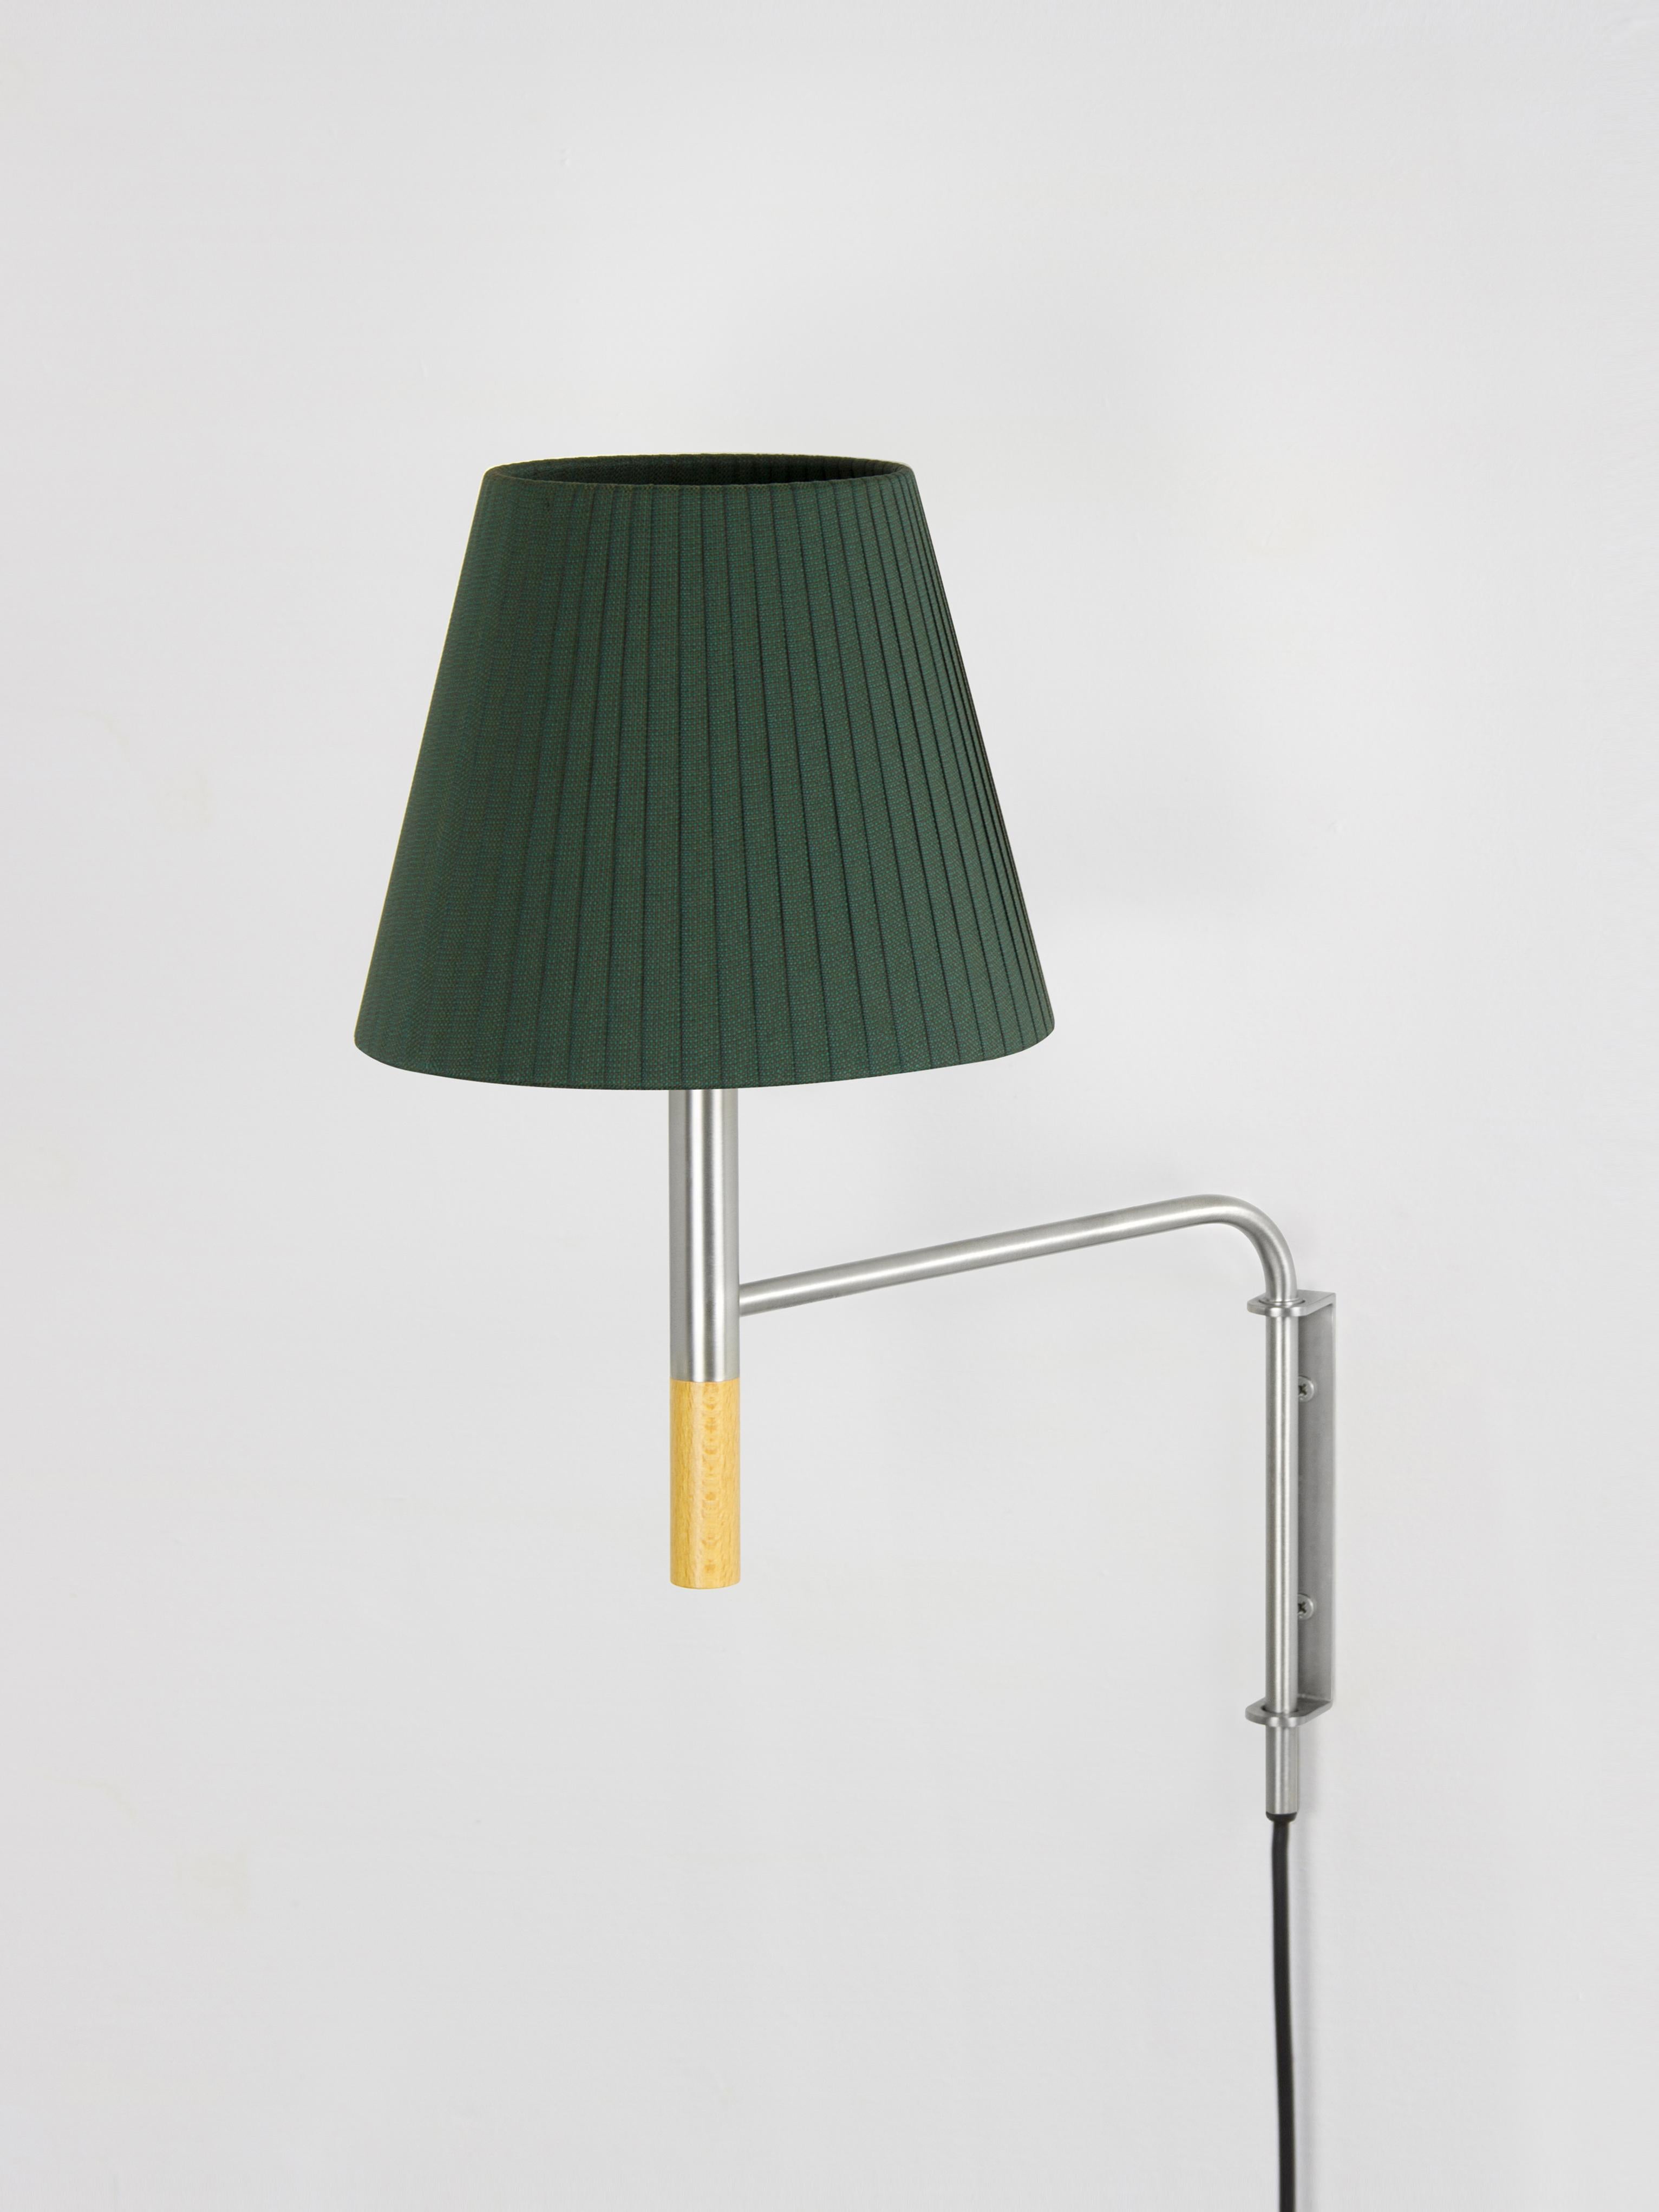 Green BC1 wall lamp by Santa & Cole
Dimensions: D 20 x W 35 x H 44 cm
Materials: Metal, beech wood, ribbon.
Available in other colors.

The BC1, BC2 and BC3 wall lamps are the epitome of sturdy construction, aesthetic sobriety and functional